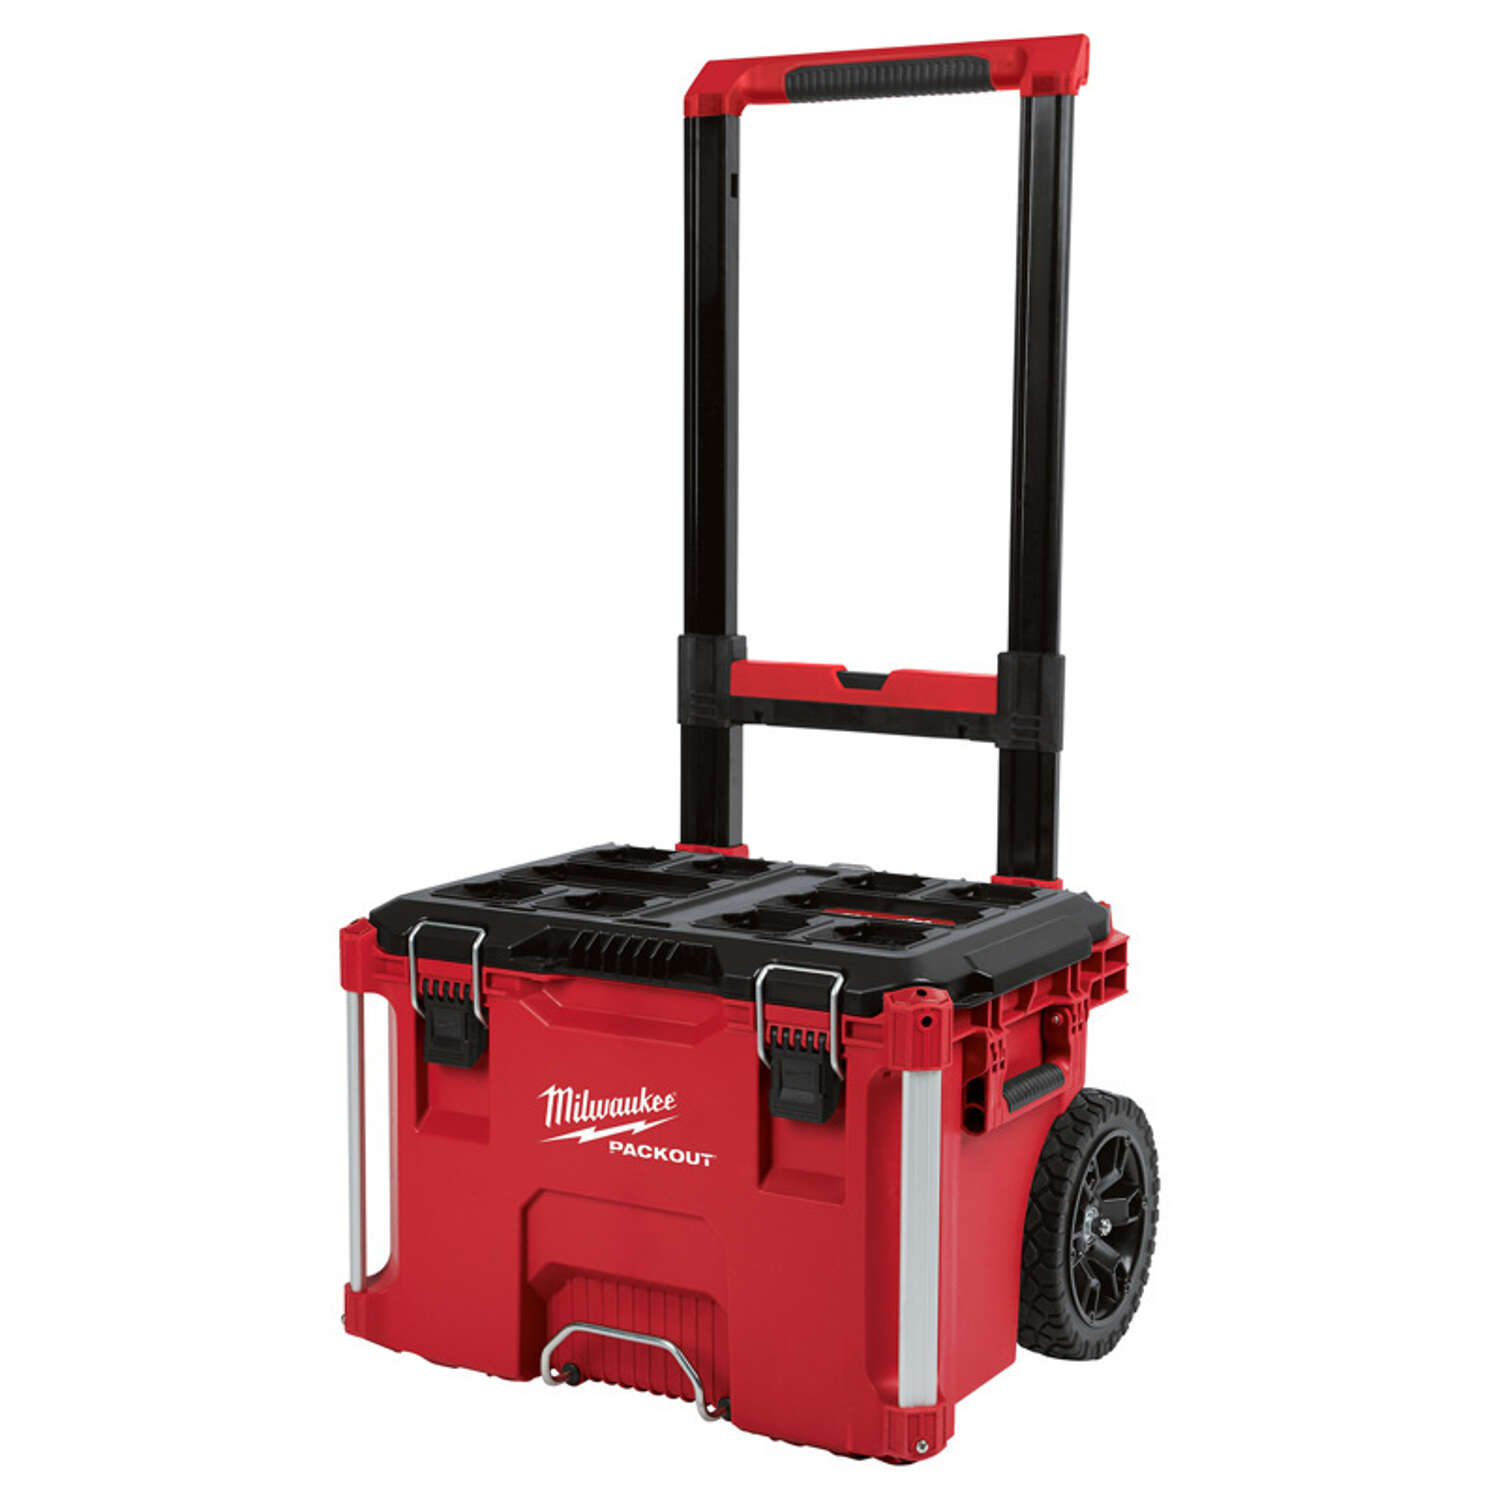 Milwaukee PACKOUT 22.1 in. Rolling Tool Box Black/Red - Ace Hardware $99.99